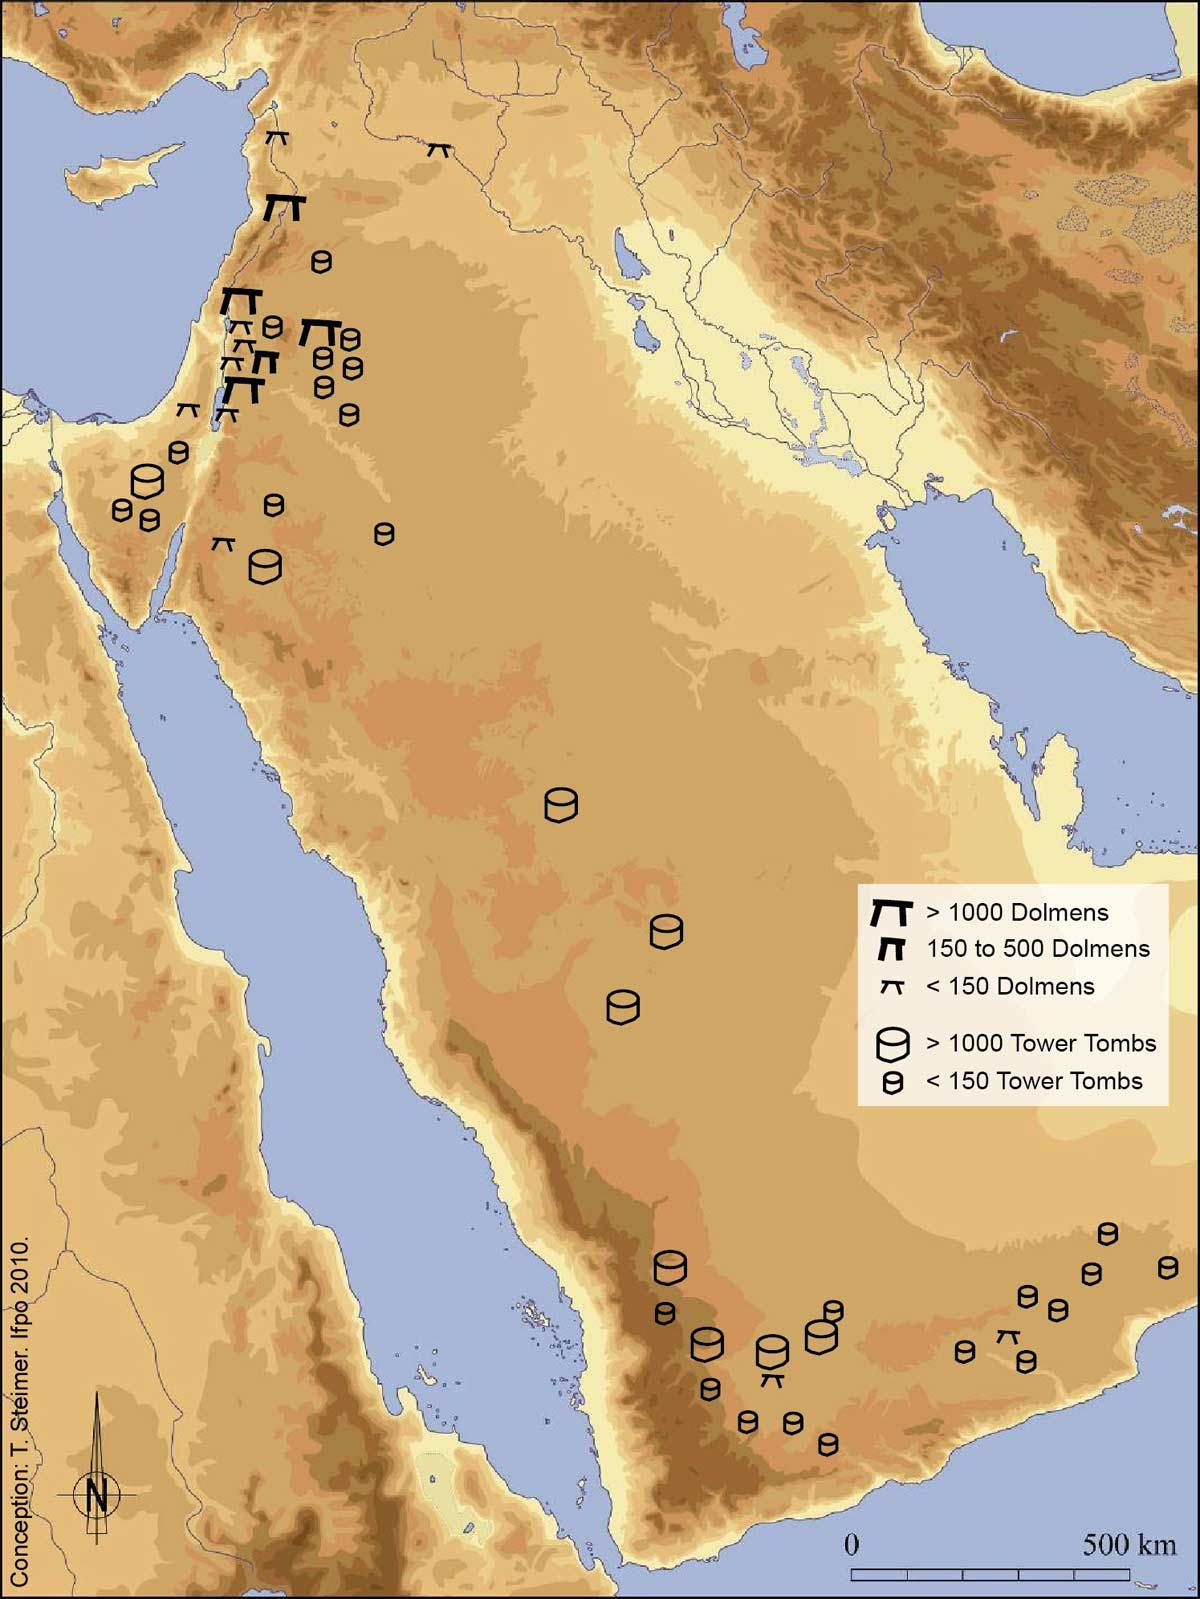 Distribution of the tombs, towers and dolmens of the ancient Bronze (-3 600 /-2 000) in the Levant and in the Arabian Peninsula. 

